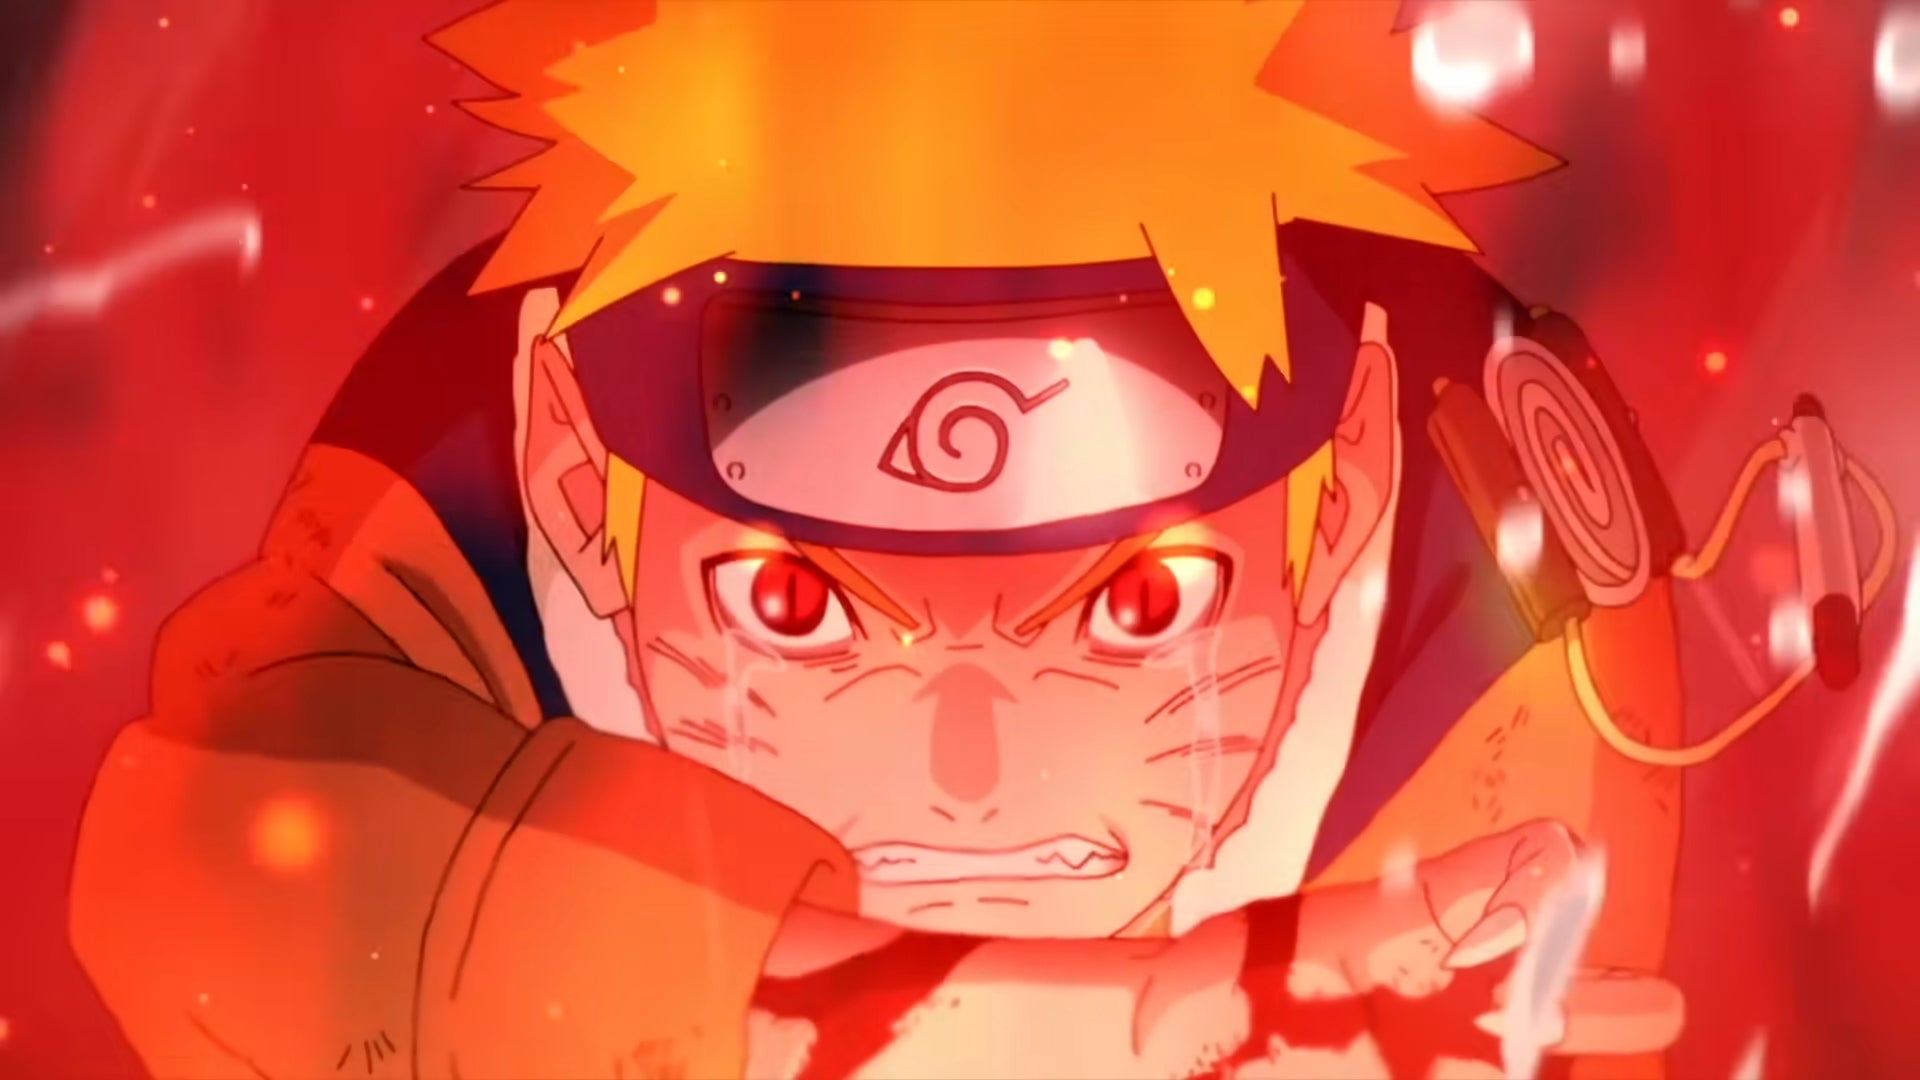 Naruto Is Finally Ending (And Hopefully The Fandom Wars, Too)